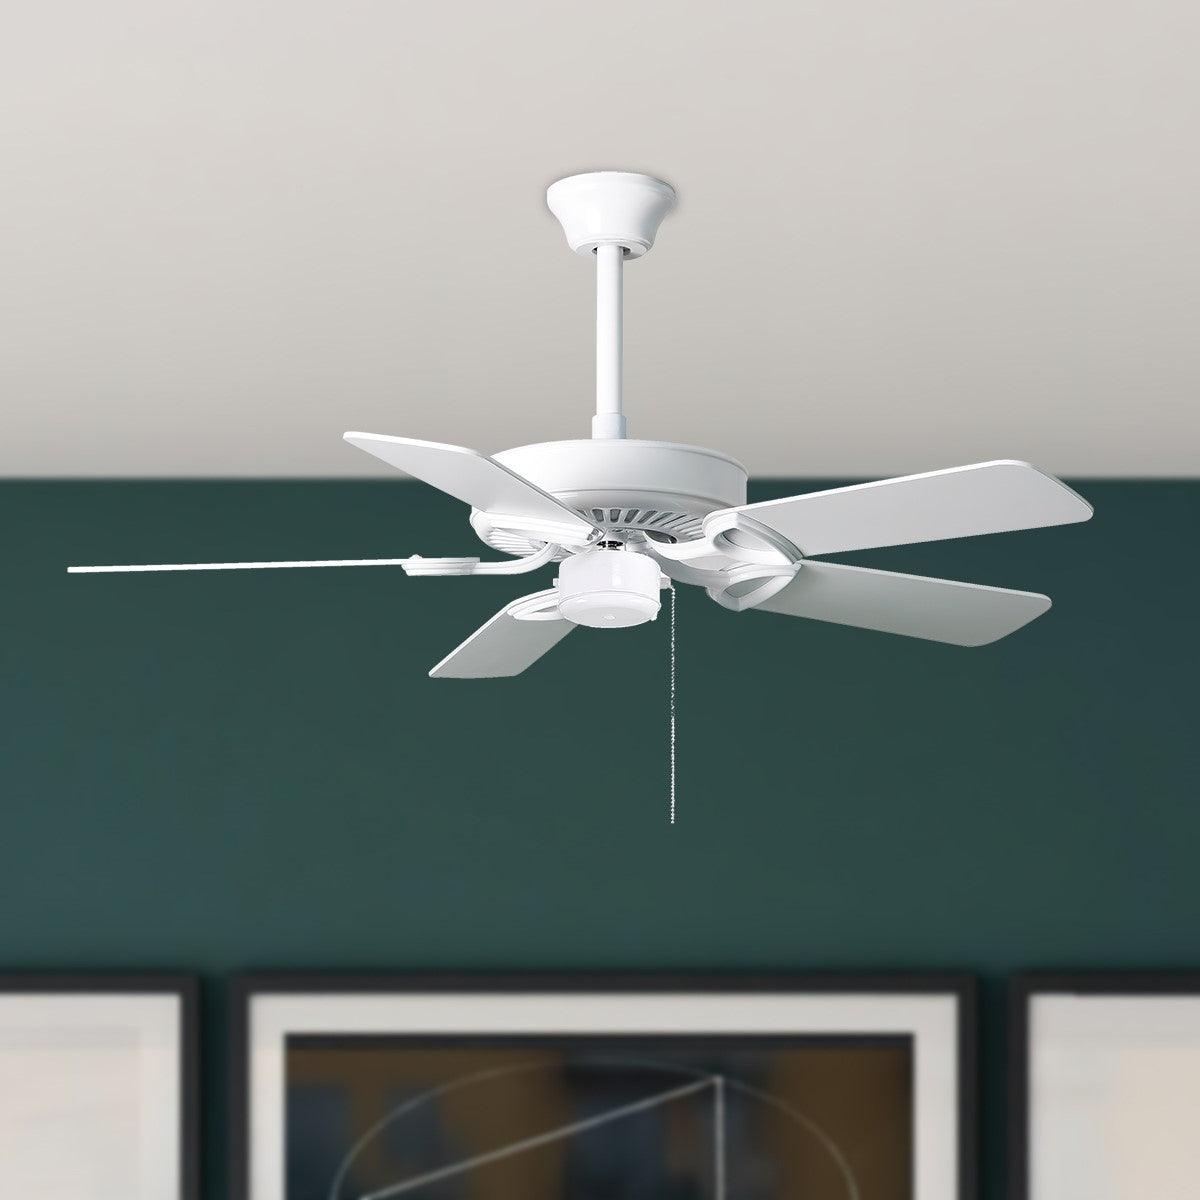 America USA 42 Inch Ceiling Fan With Pull Chain, Gloss White Finish